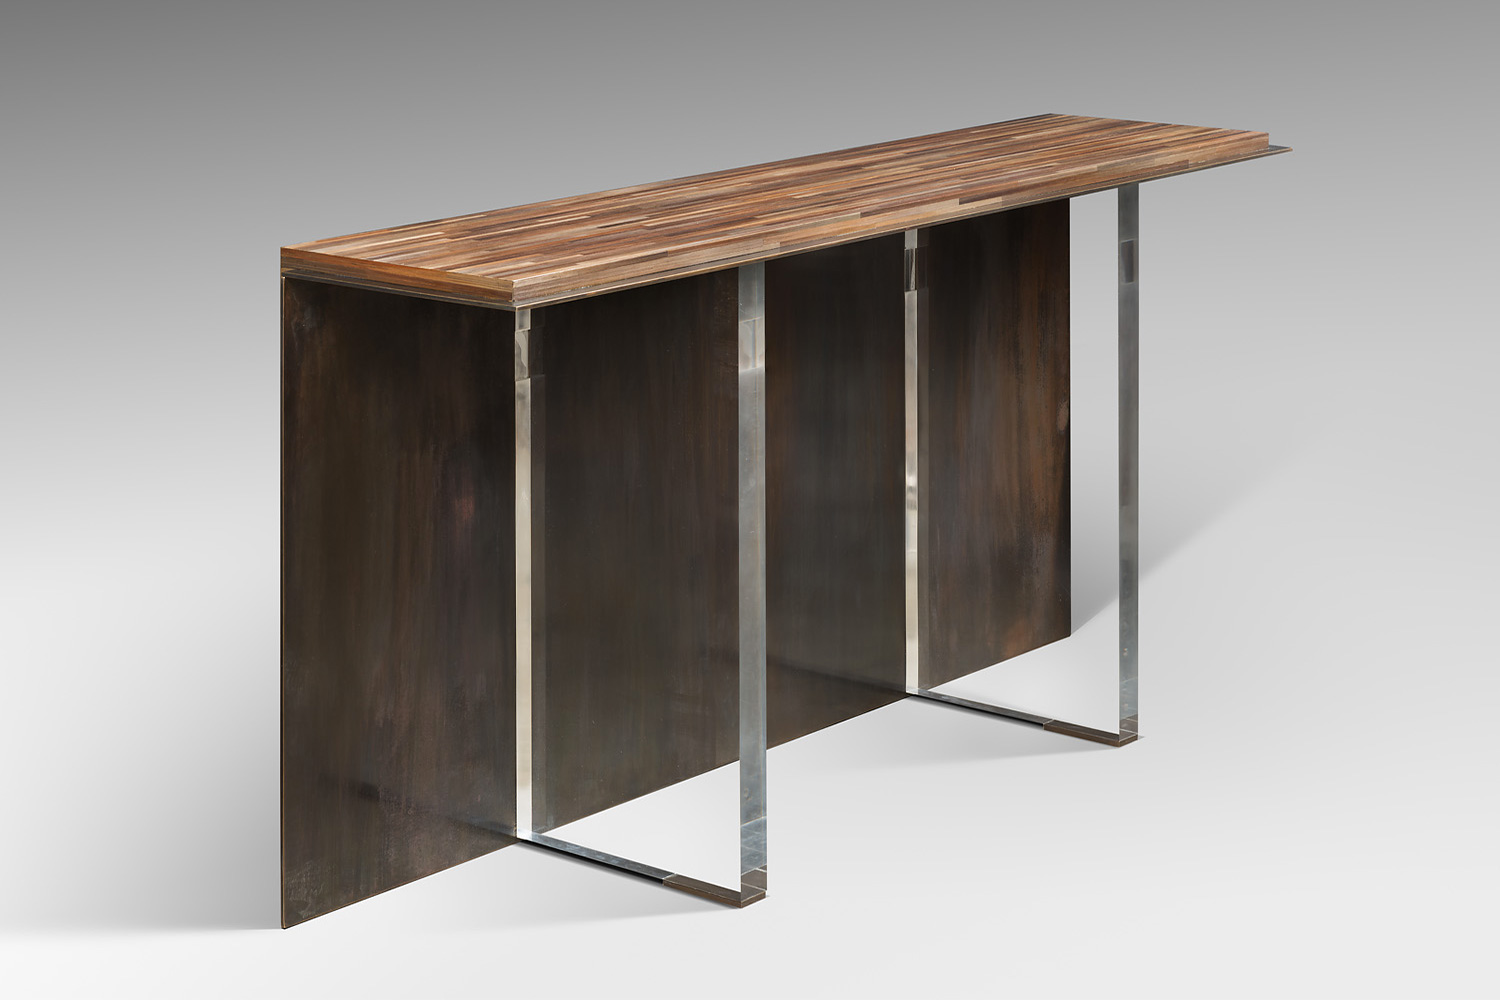 Straw marquetry “L” console